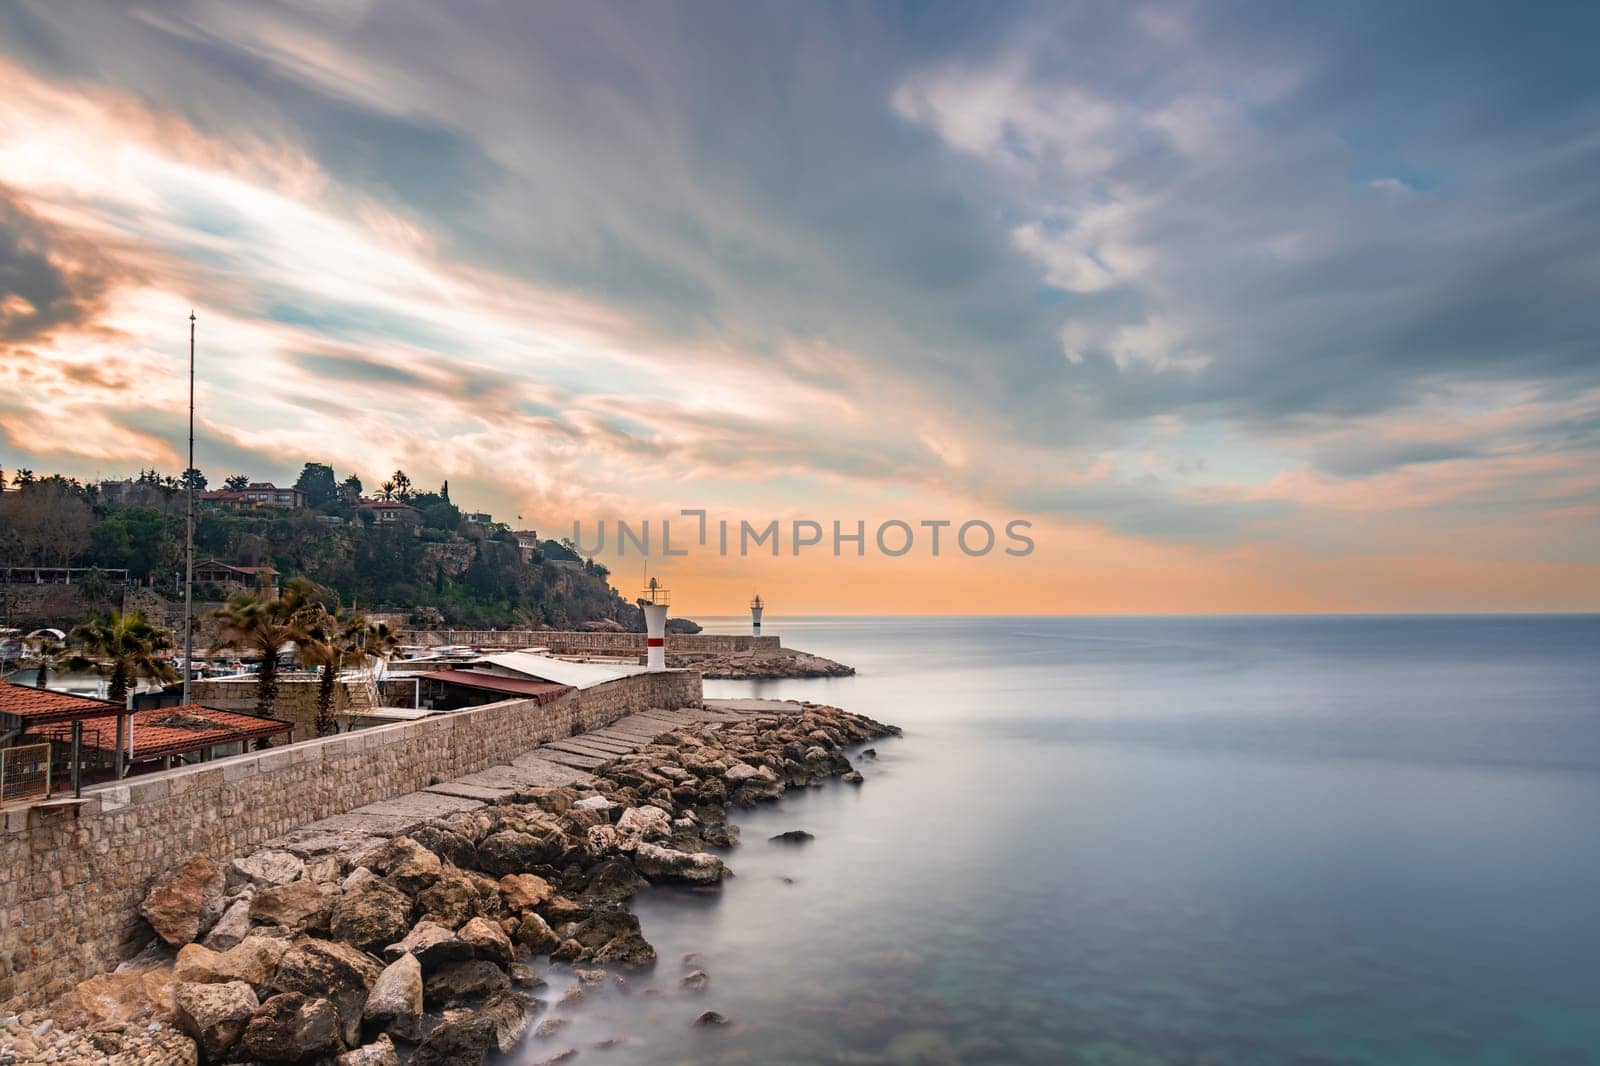 Antalya Old Town marina entrance photographed at sunrise with long exposure technique